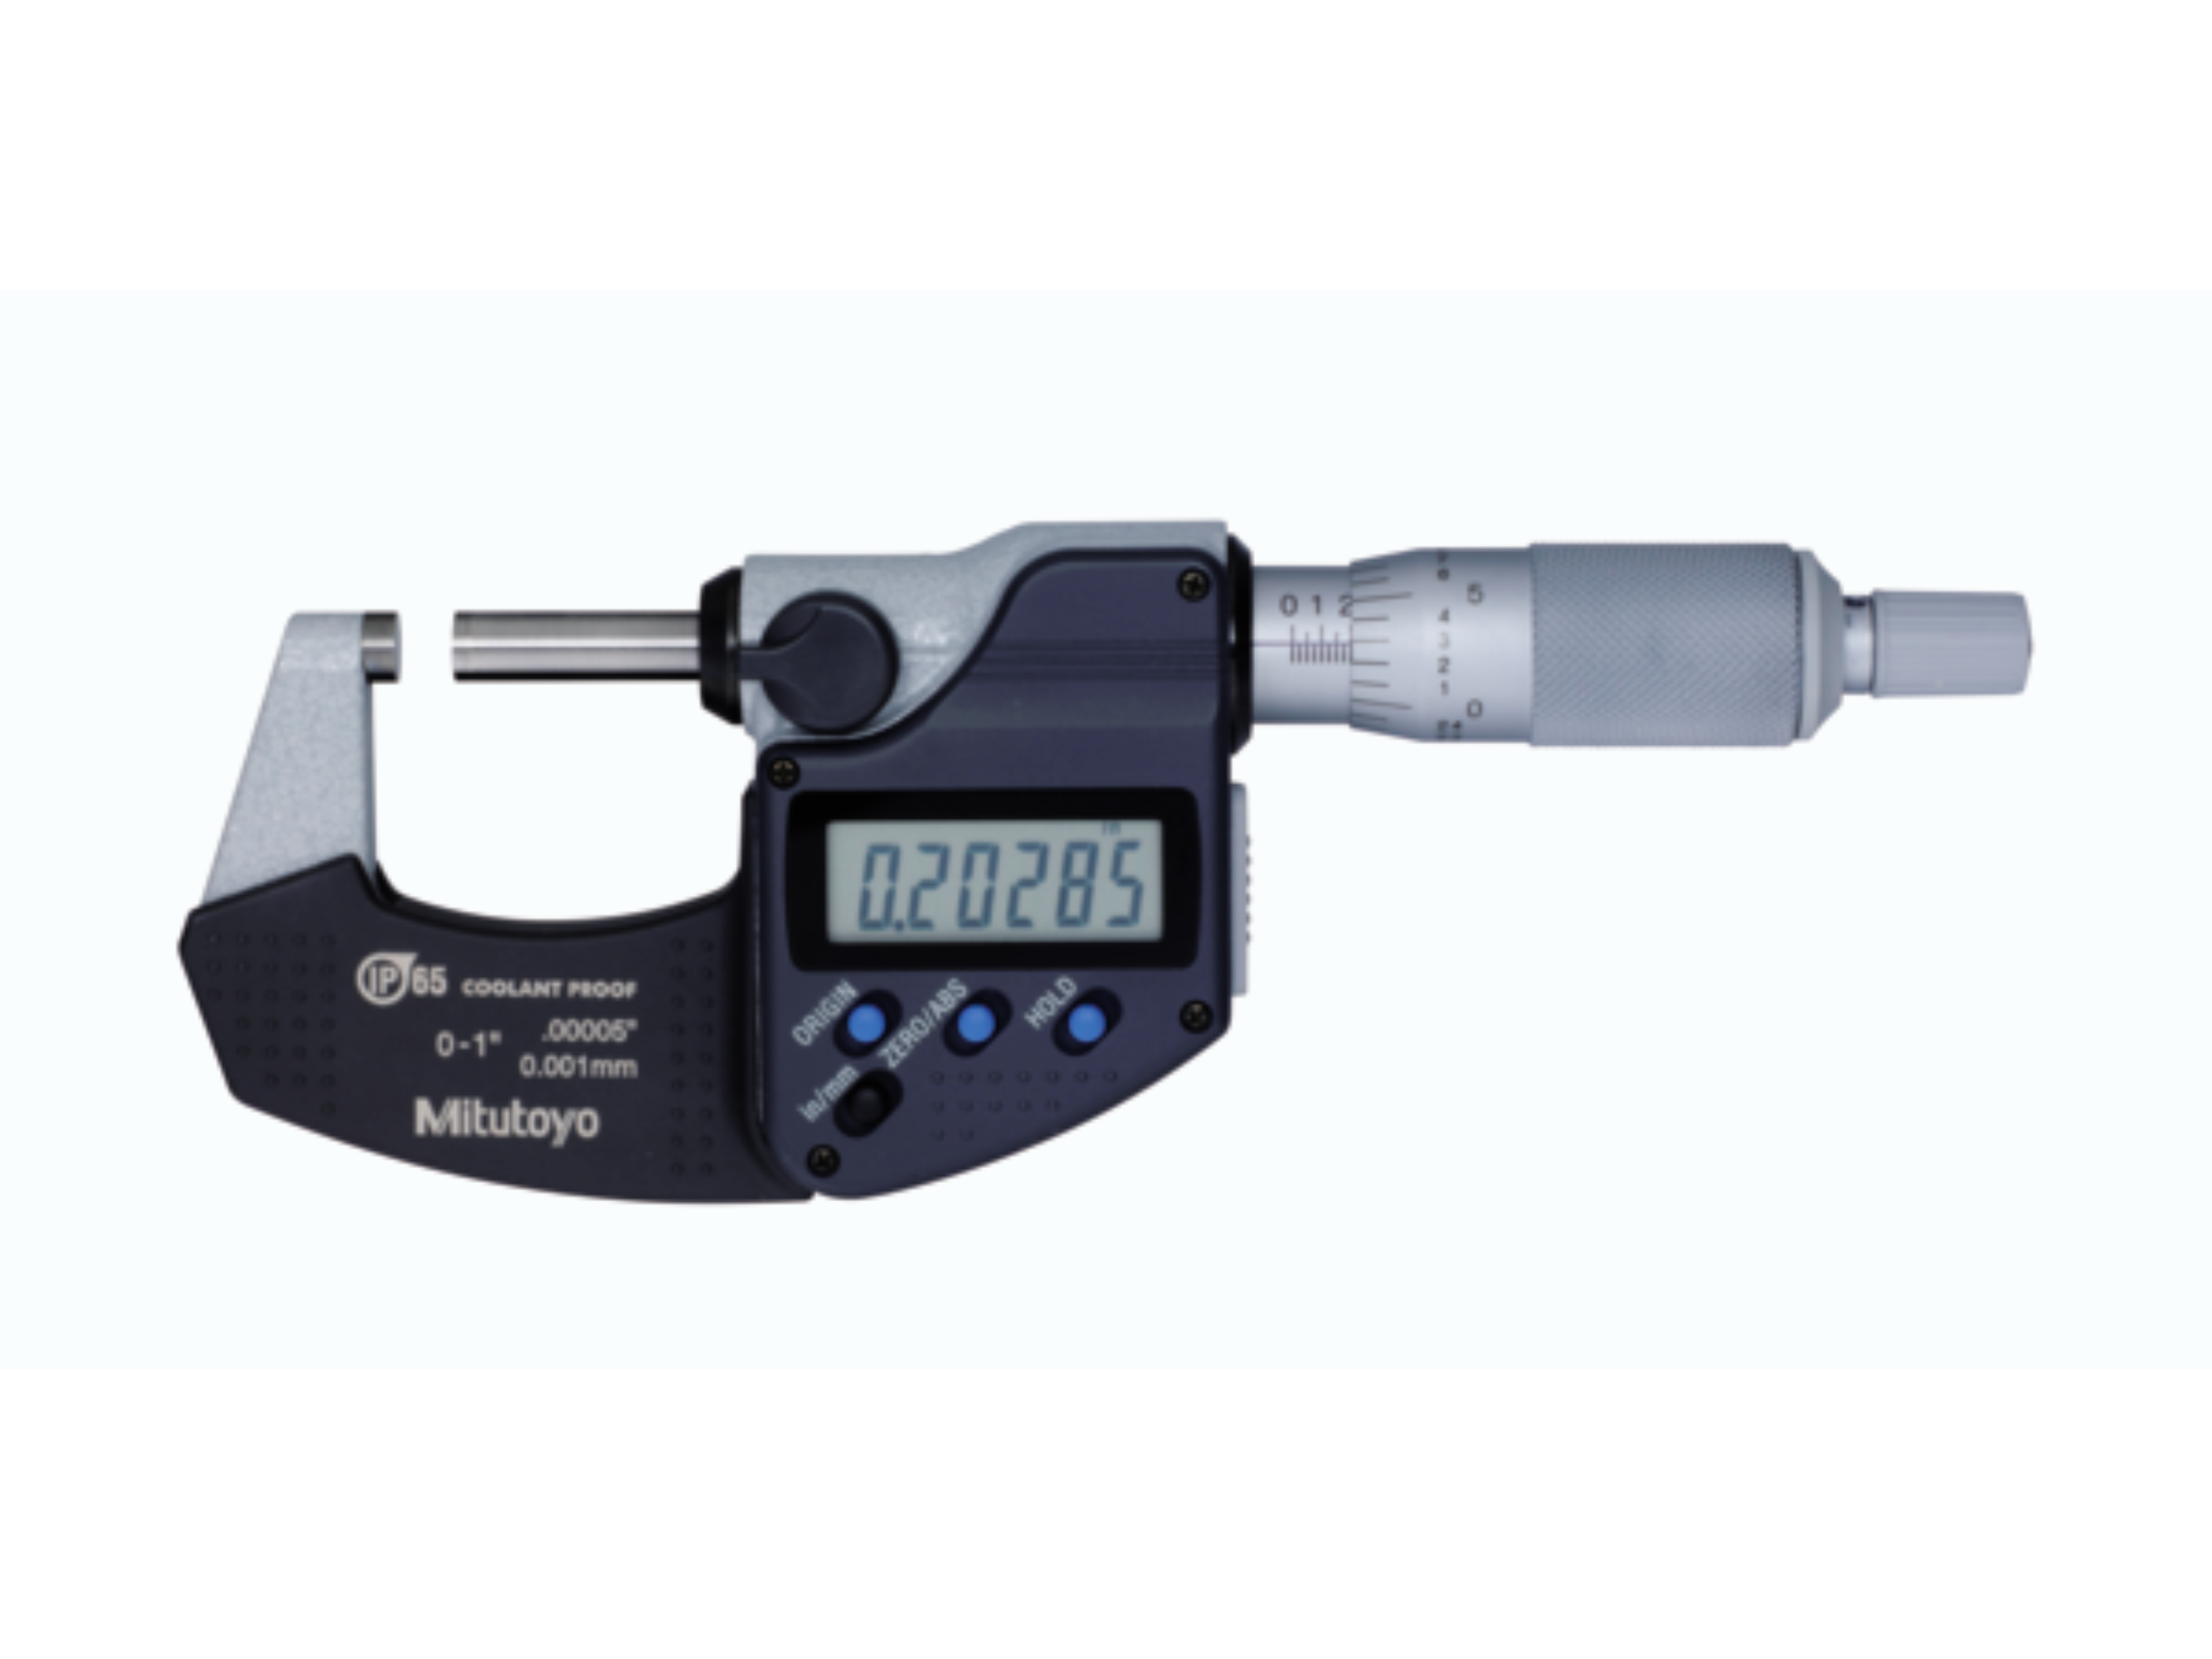 Digimatic Micrometer 0-25mm(0-1"), IP65, Ratchet Stop, With Output 293-330-30